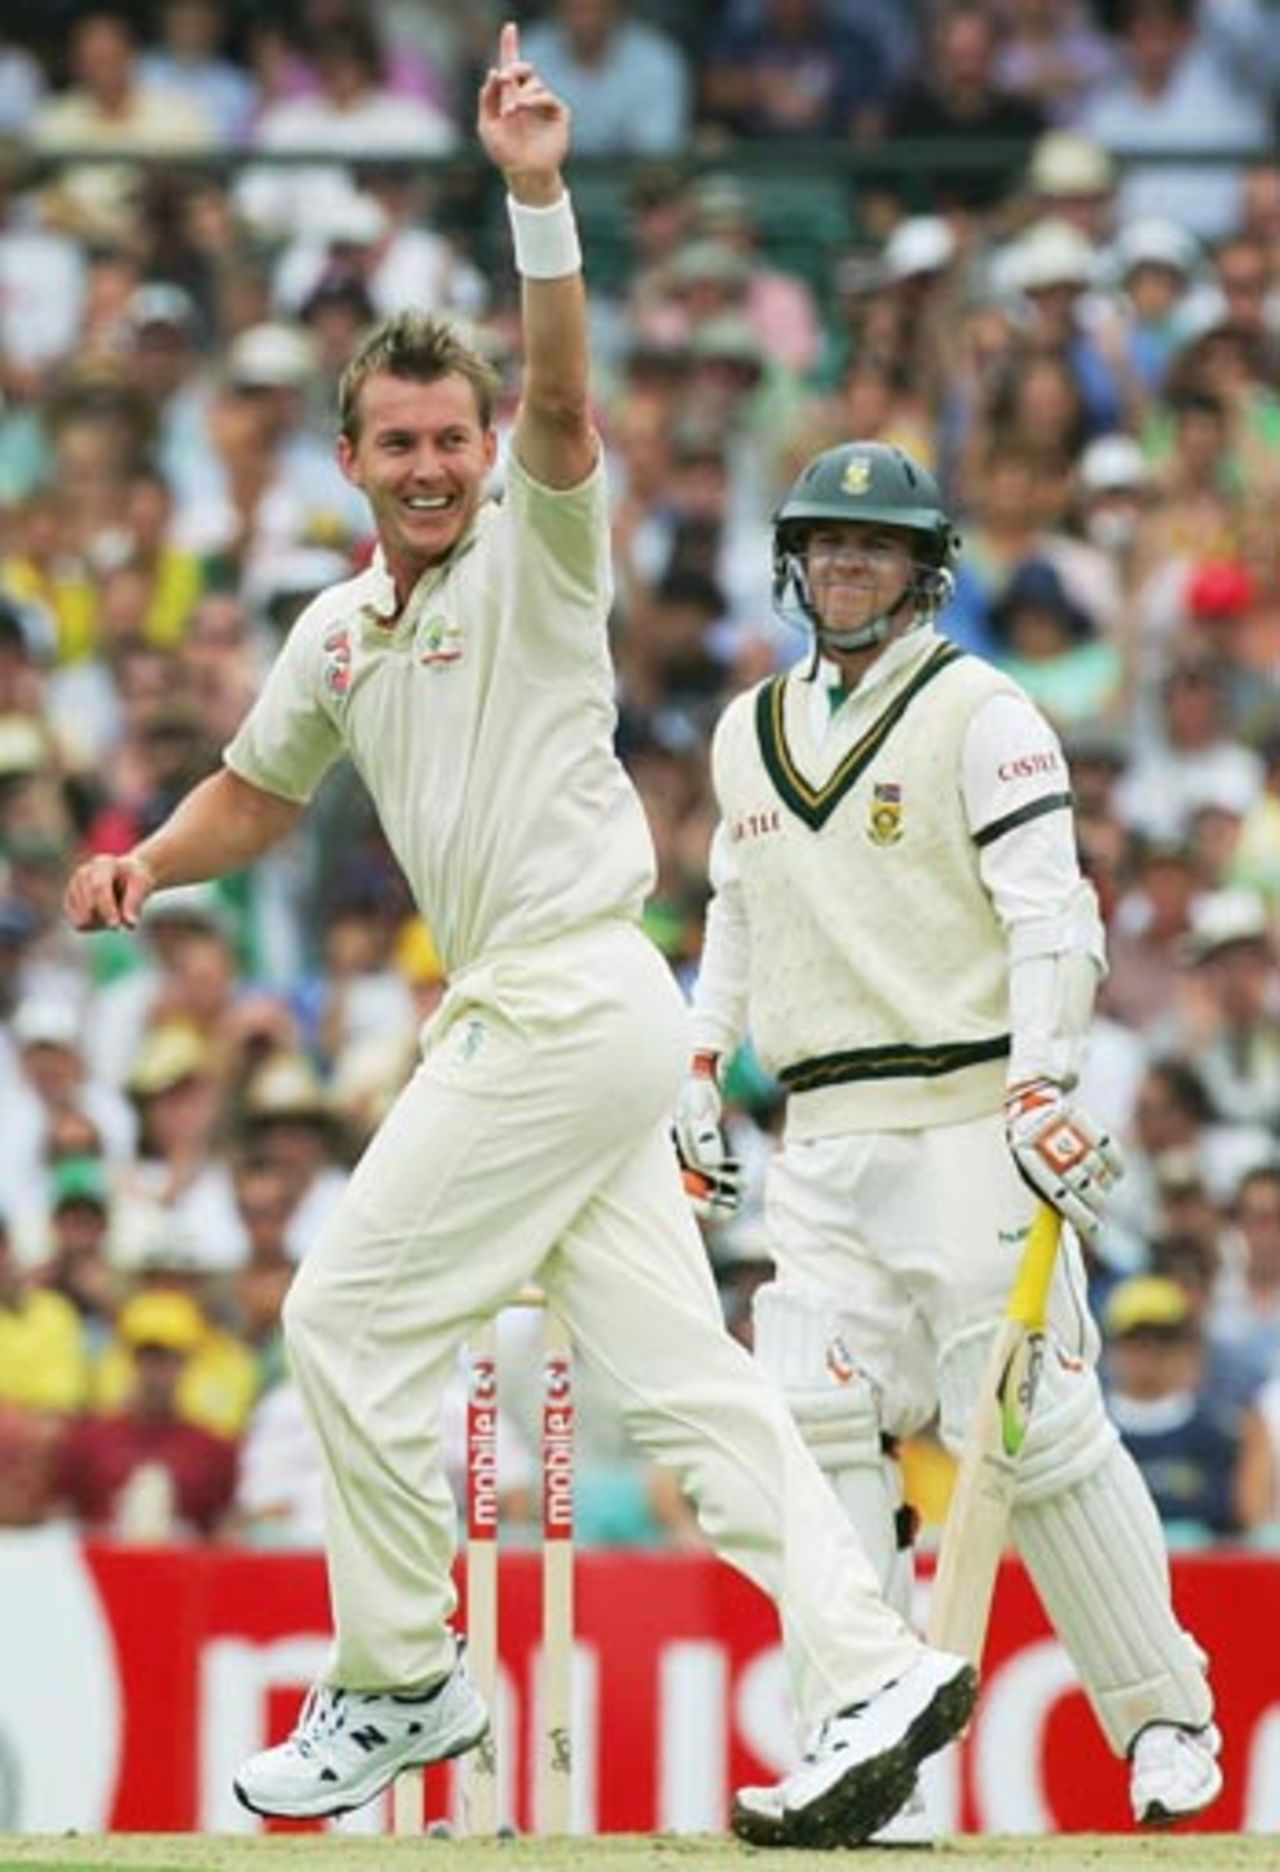 Brett Lee reacts after nailing AB de Villiers, Australia v South Africa, 3rd Test, Sydney, 1st day, January 2, 2006